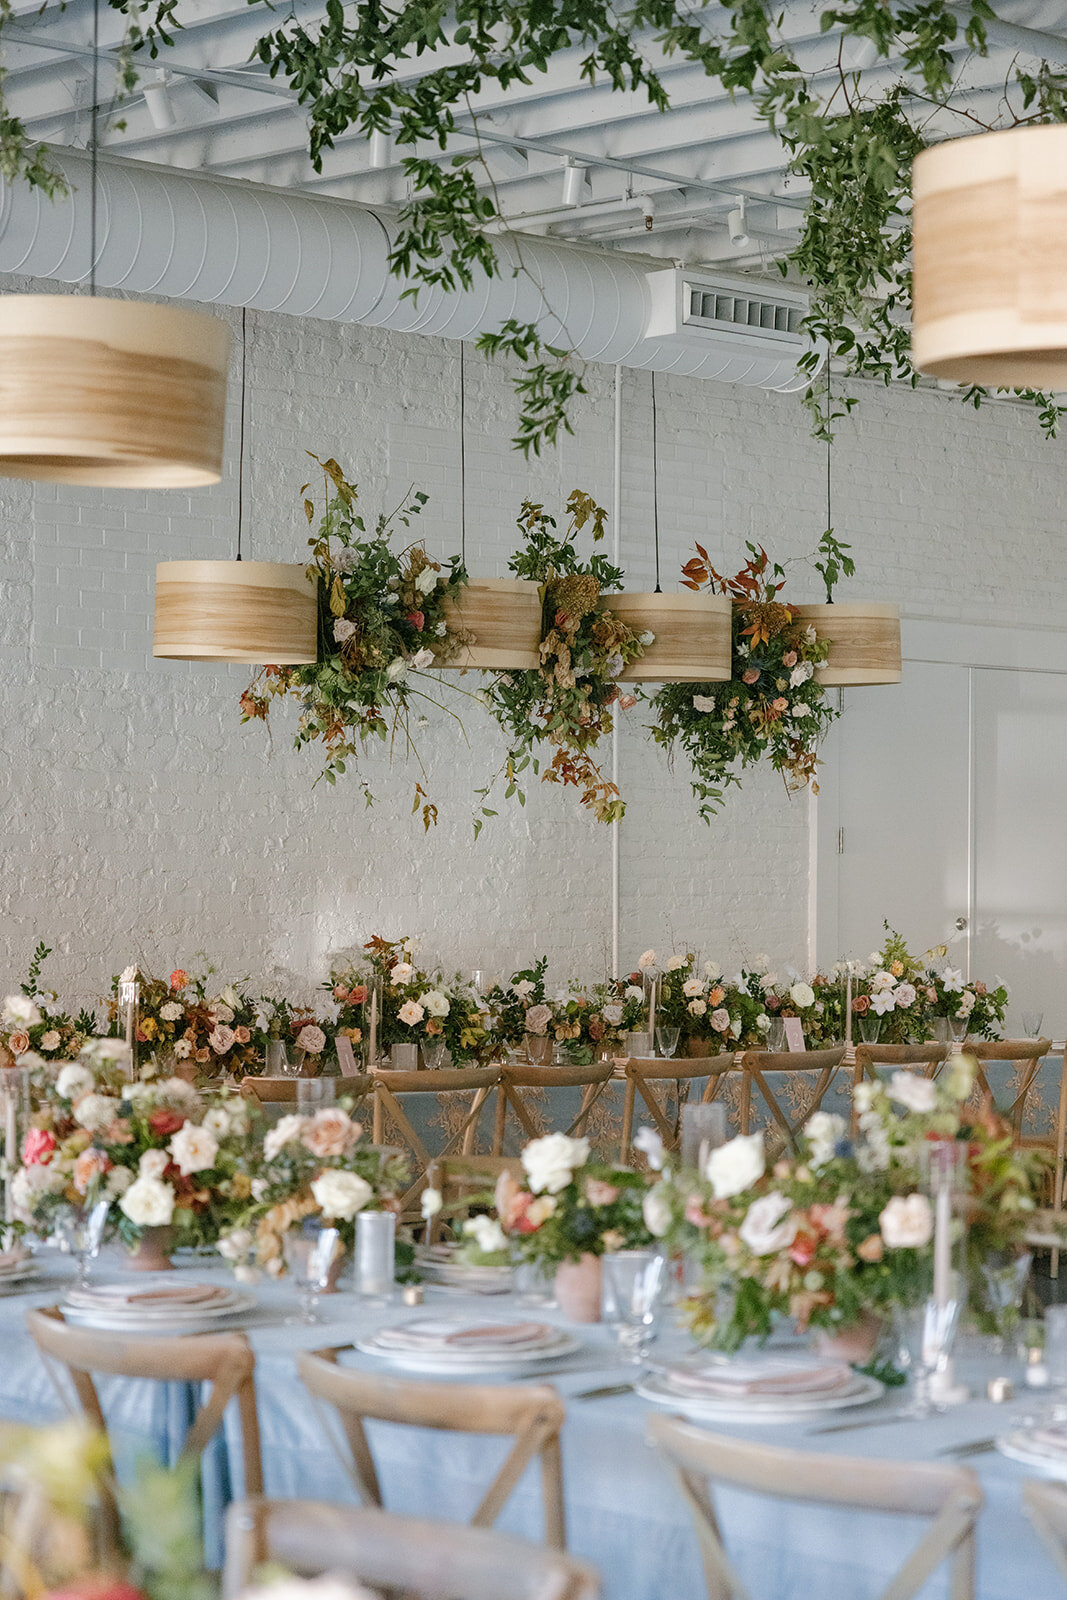 Floral Chandelier hanging floral clouds accent fall wedding reception in Raleigh, NC with roses, hydrangeas, and fall branches in colors of mauve, copper, cream, dusty pink, and green. Design by Rosemary and Finch Floral Design in Nashville, TN.